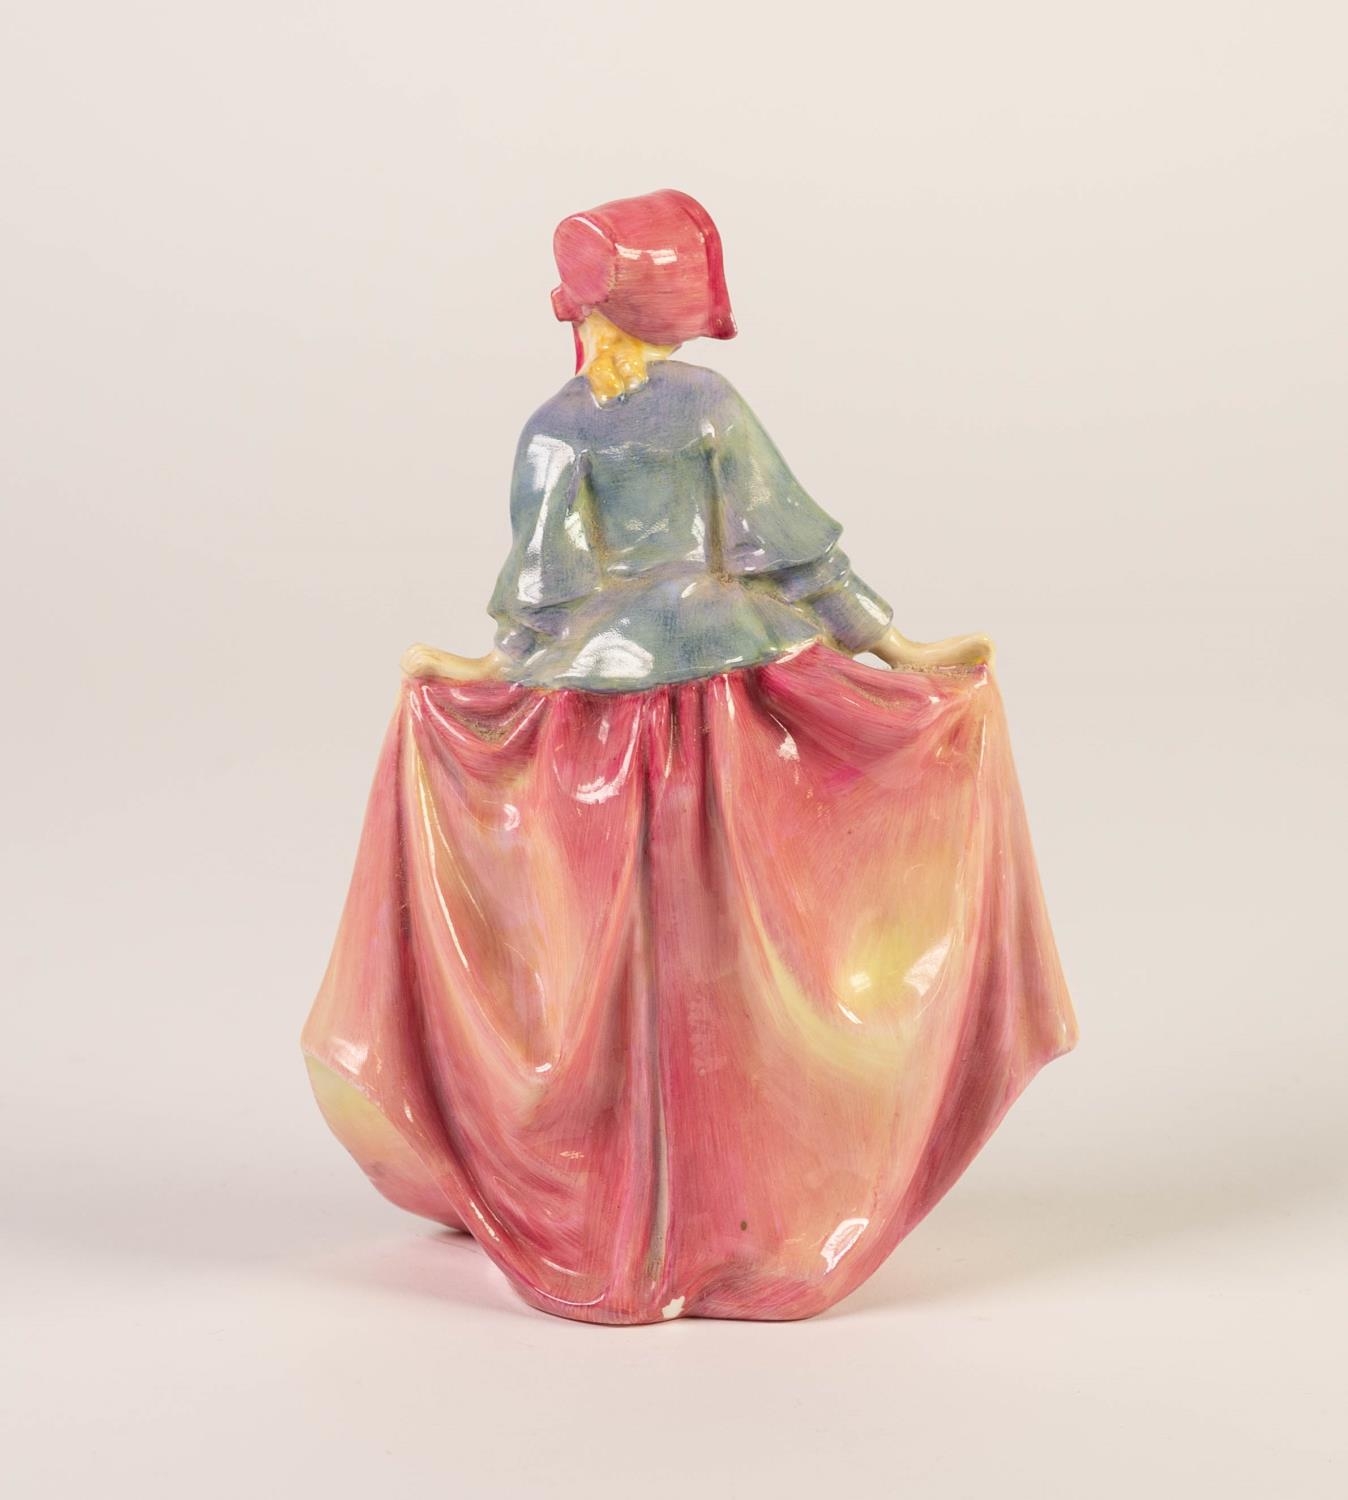 ROYAL DOULTON (Burslem) FIGURE Sweet Anne, HN 1330 (withdrawn by 1949, (small glaze chip verso) - Image 2 of 3